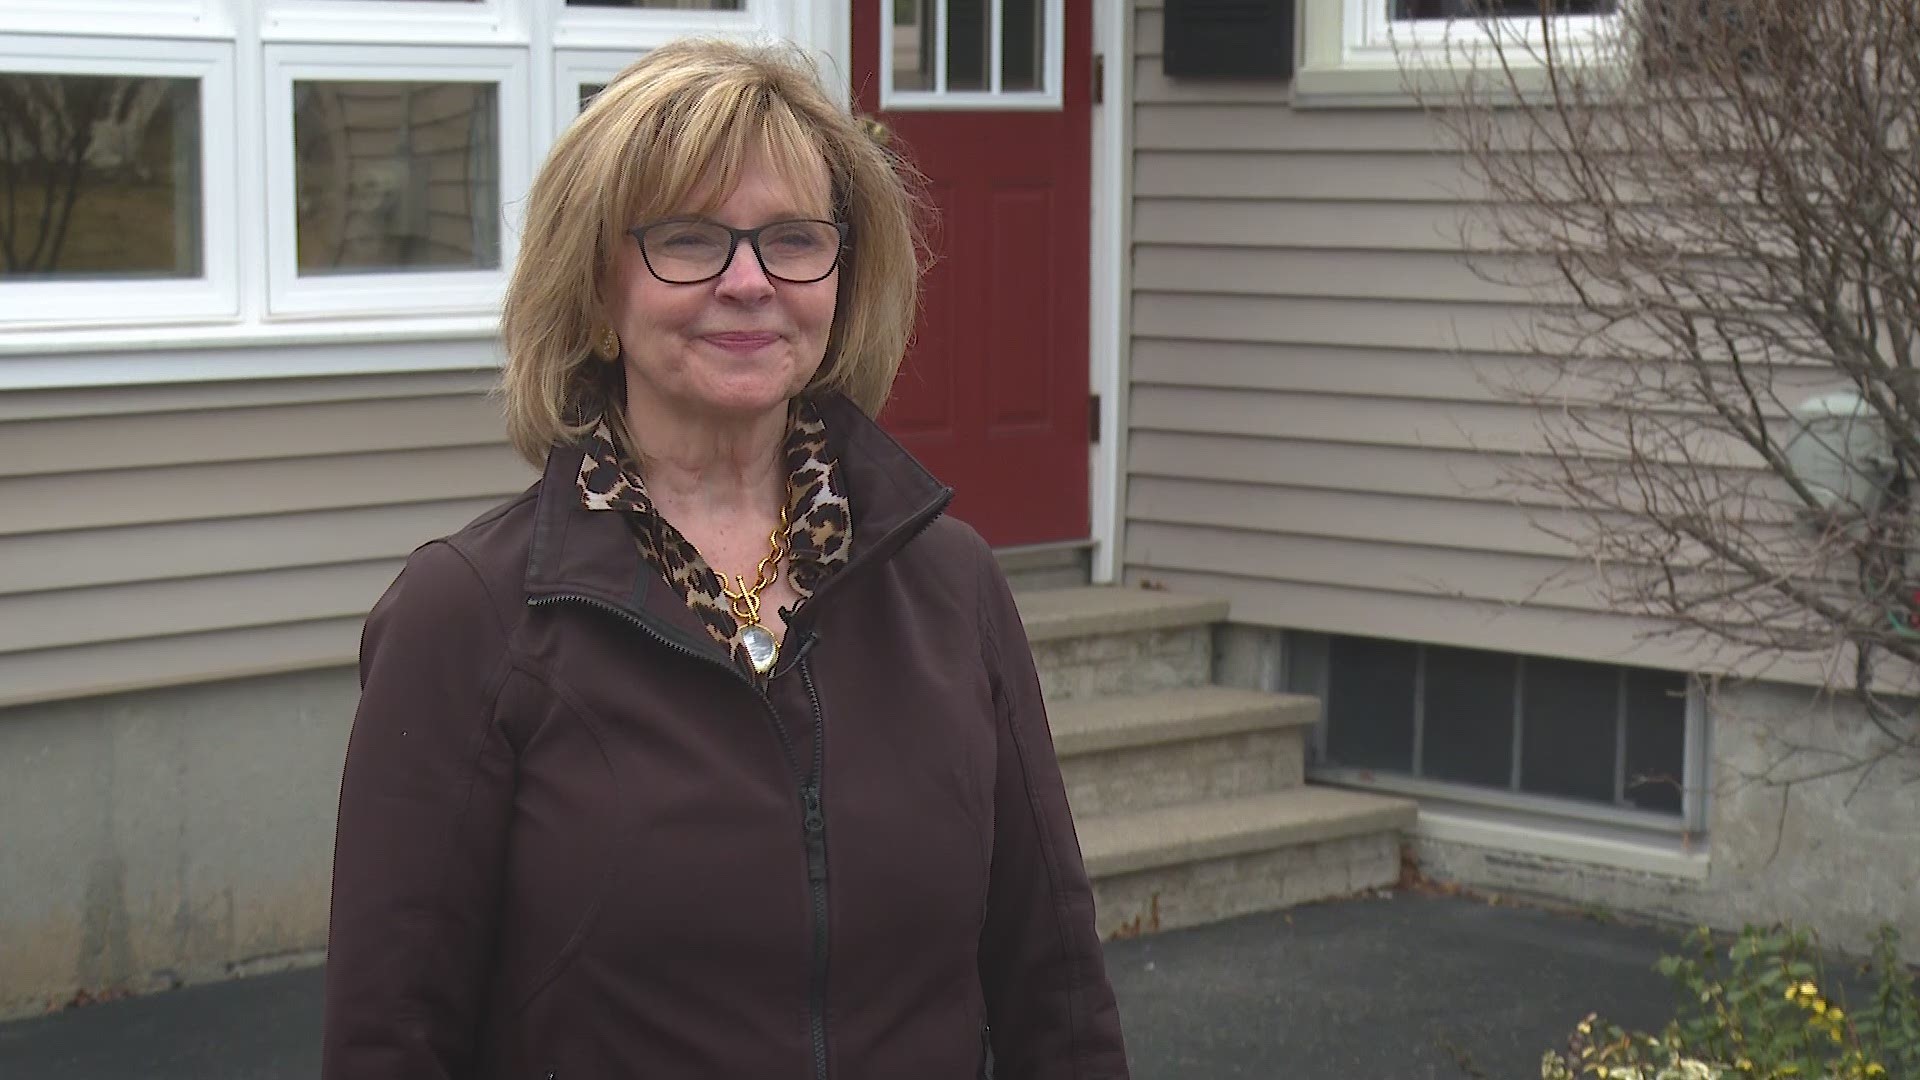 Home inspectors unregulated, unlicensed in Maine